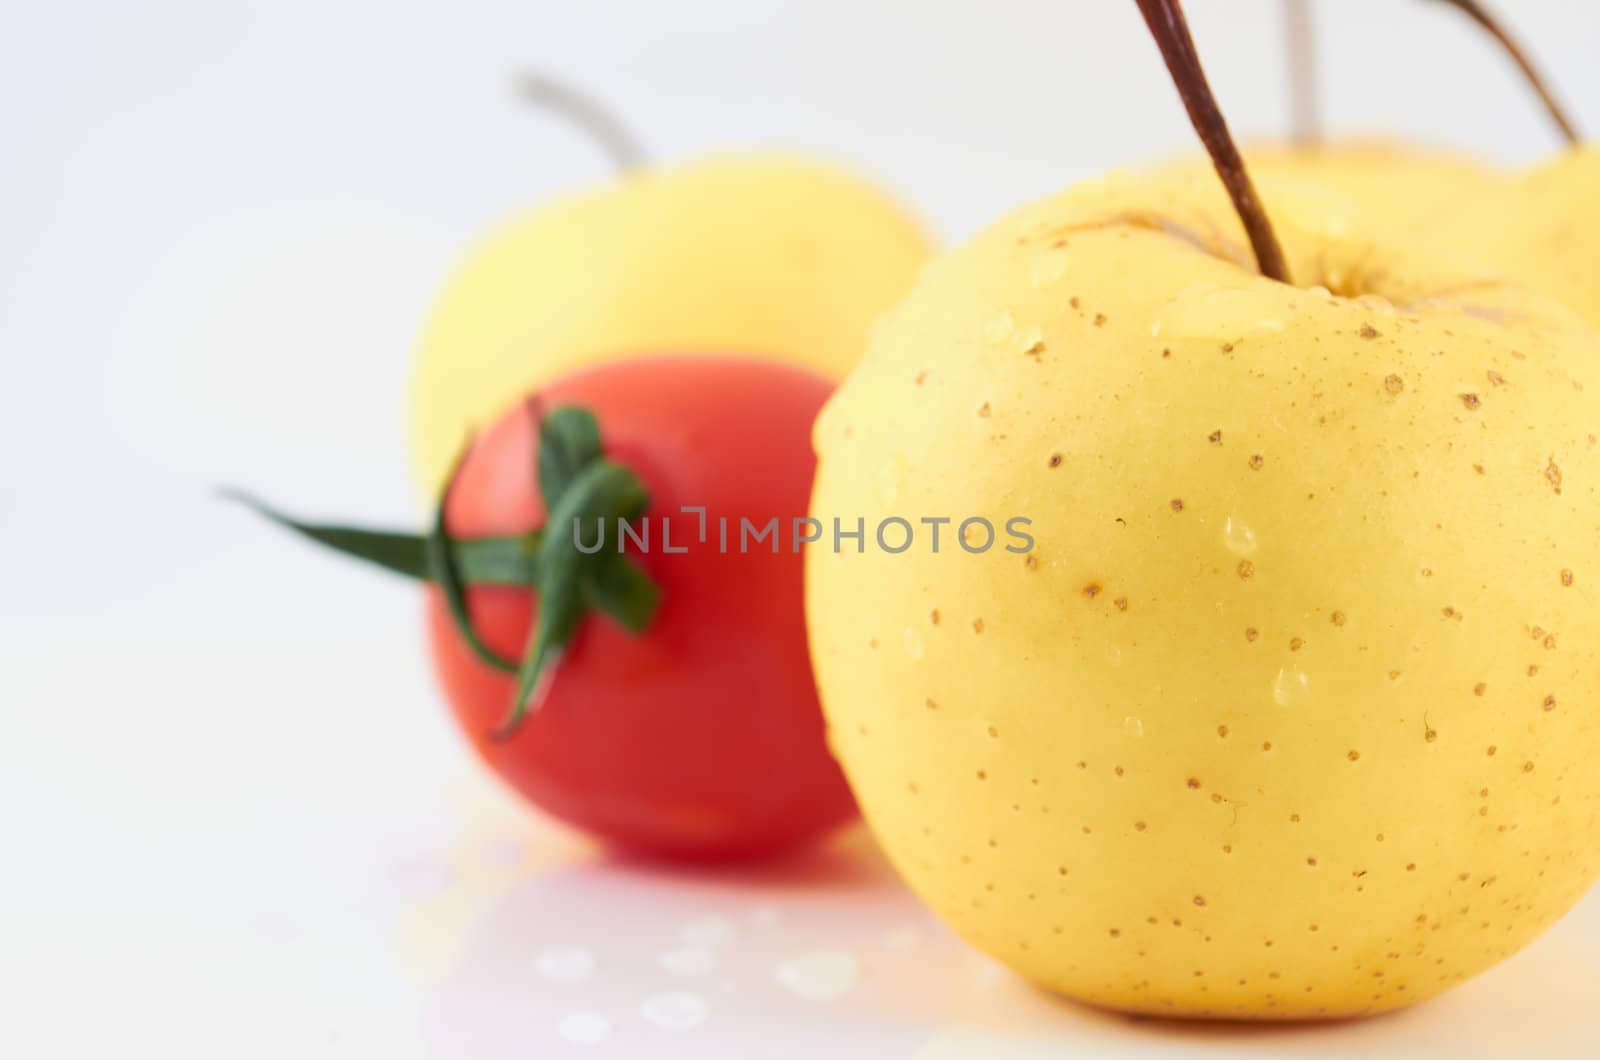 Juicy apples and tomato  by subos